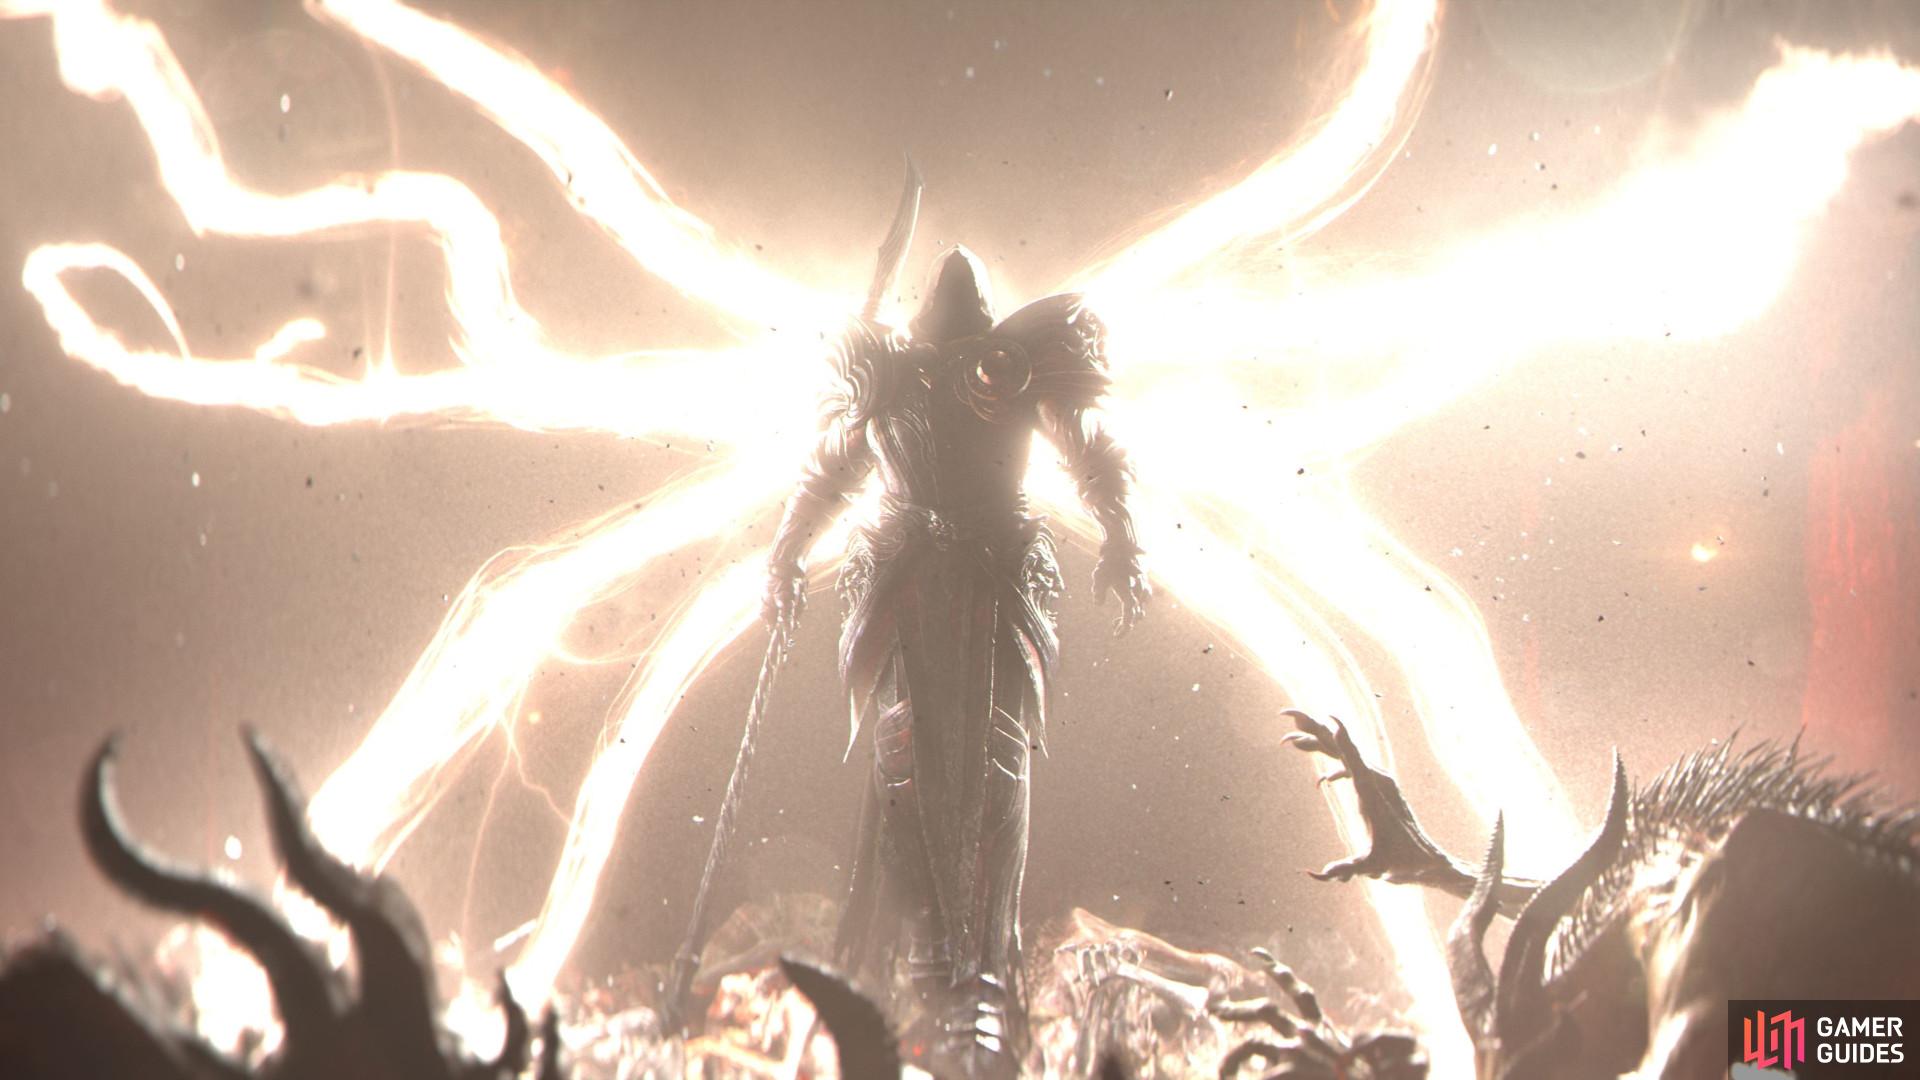 Tyrael will turn the Diablo 4 preload servers online on March 16 for preorders, and March 22 for open beta demons. Image via Blizzard Entertainment.